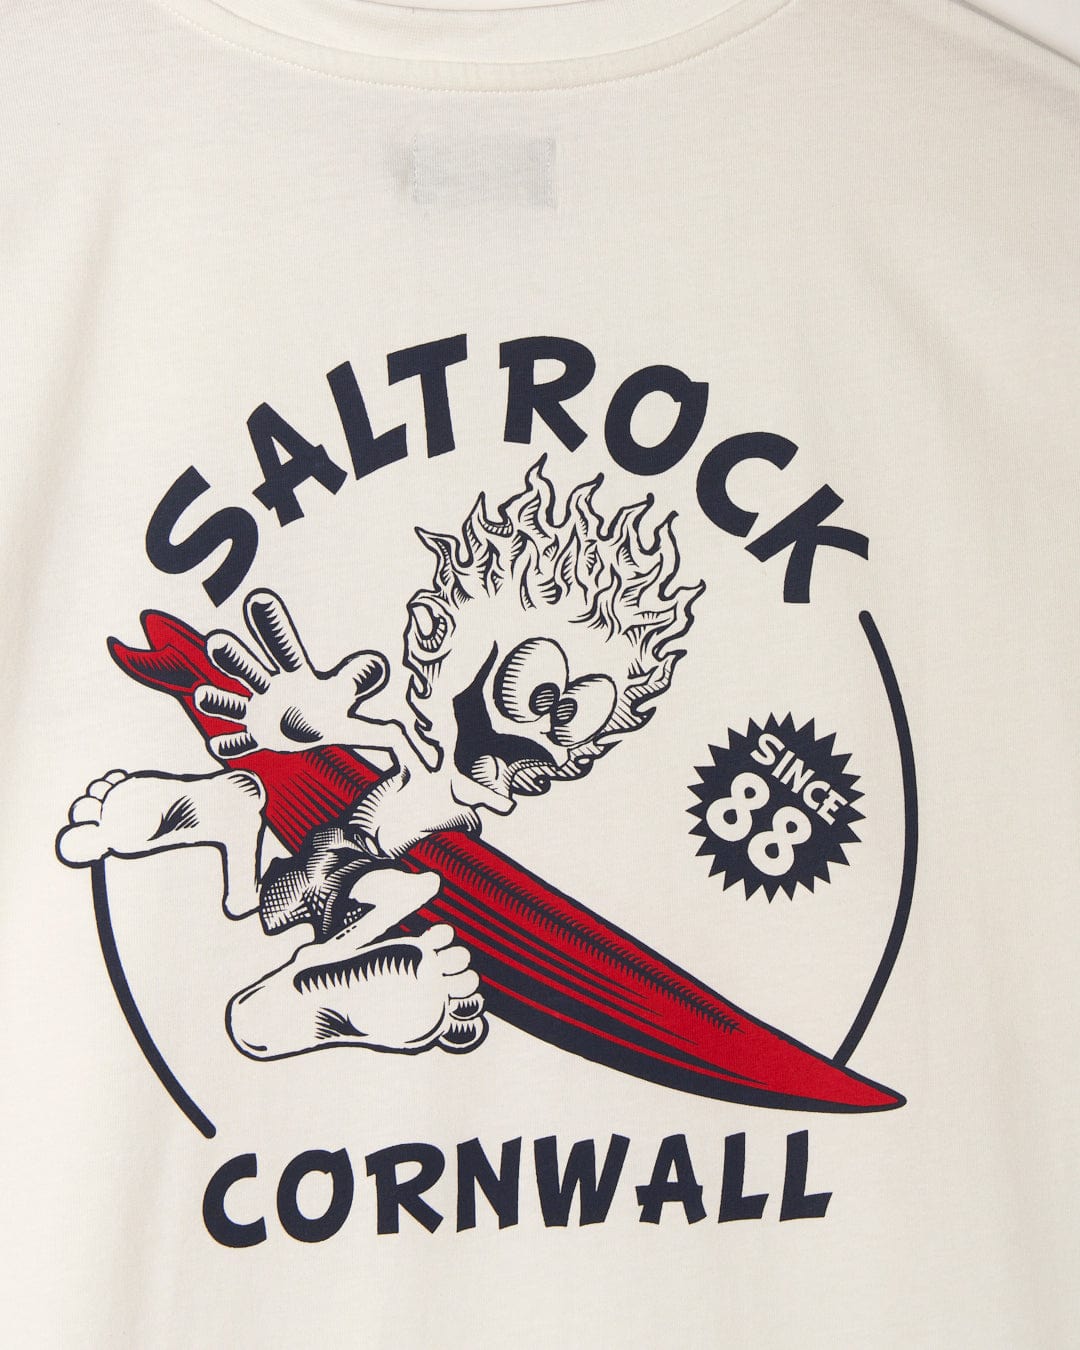 A graphic t-shirt featuring Saltrock branding, made from peached soft material, called the Wave Rider Cornwall - Mens Short Sleeve - White by Saltrock.